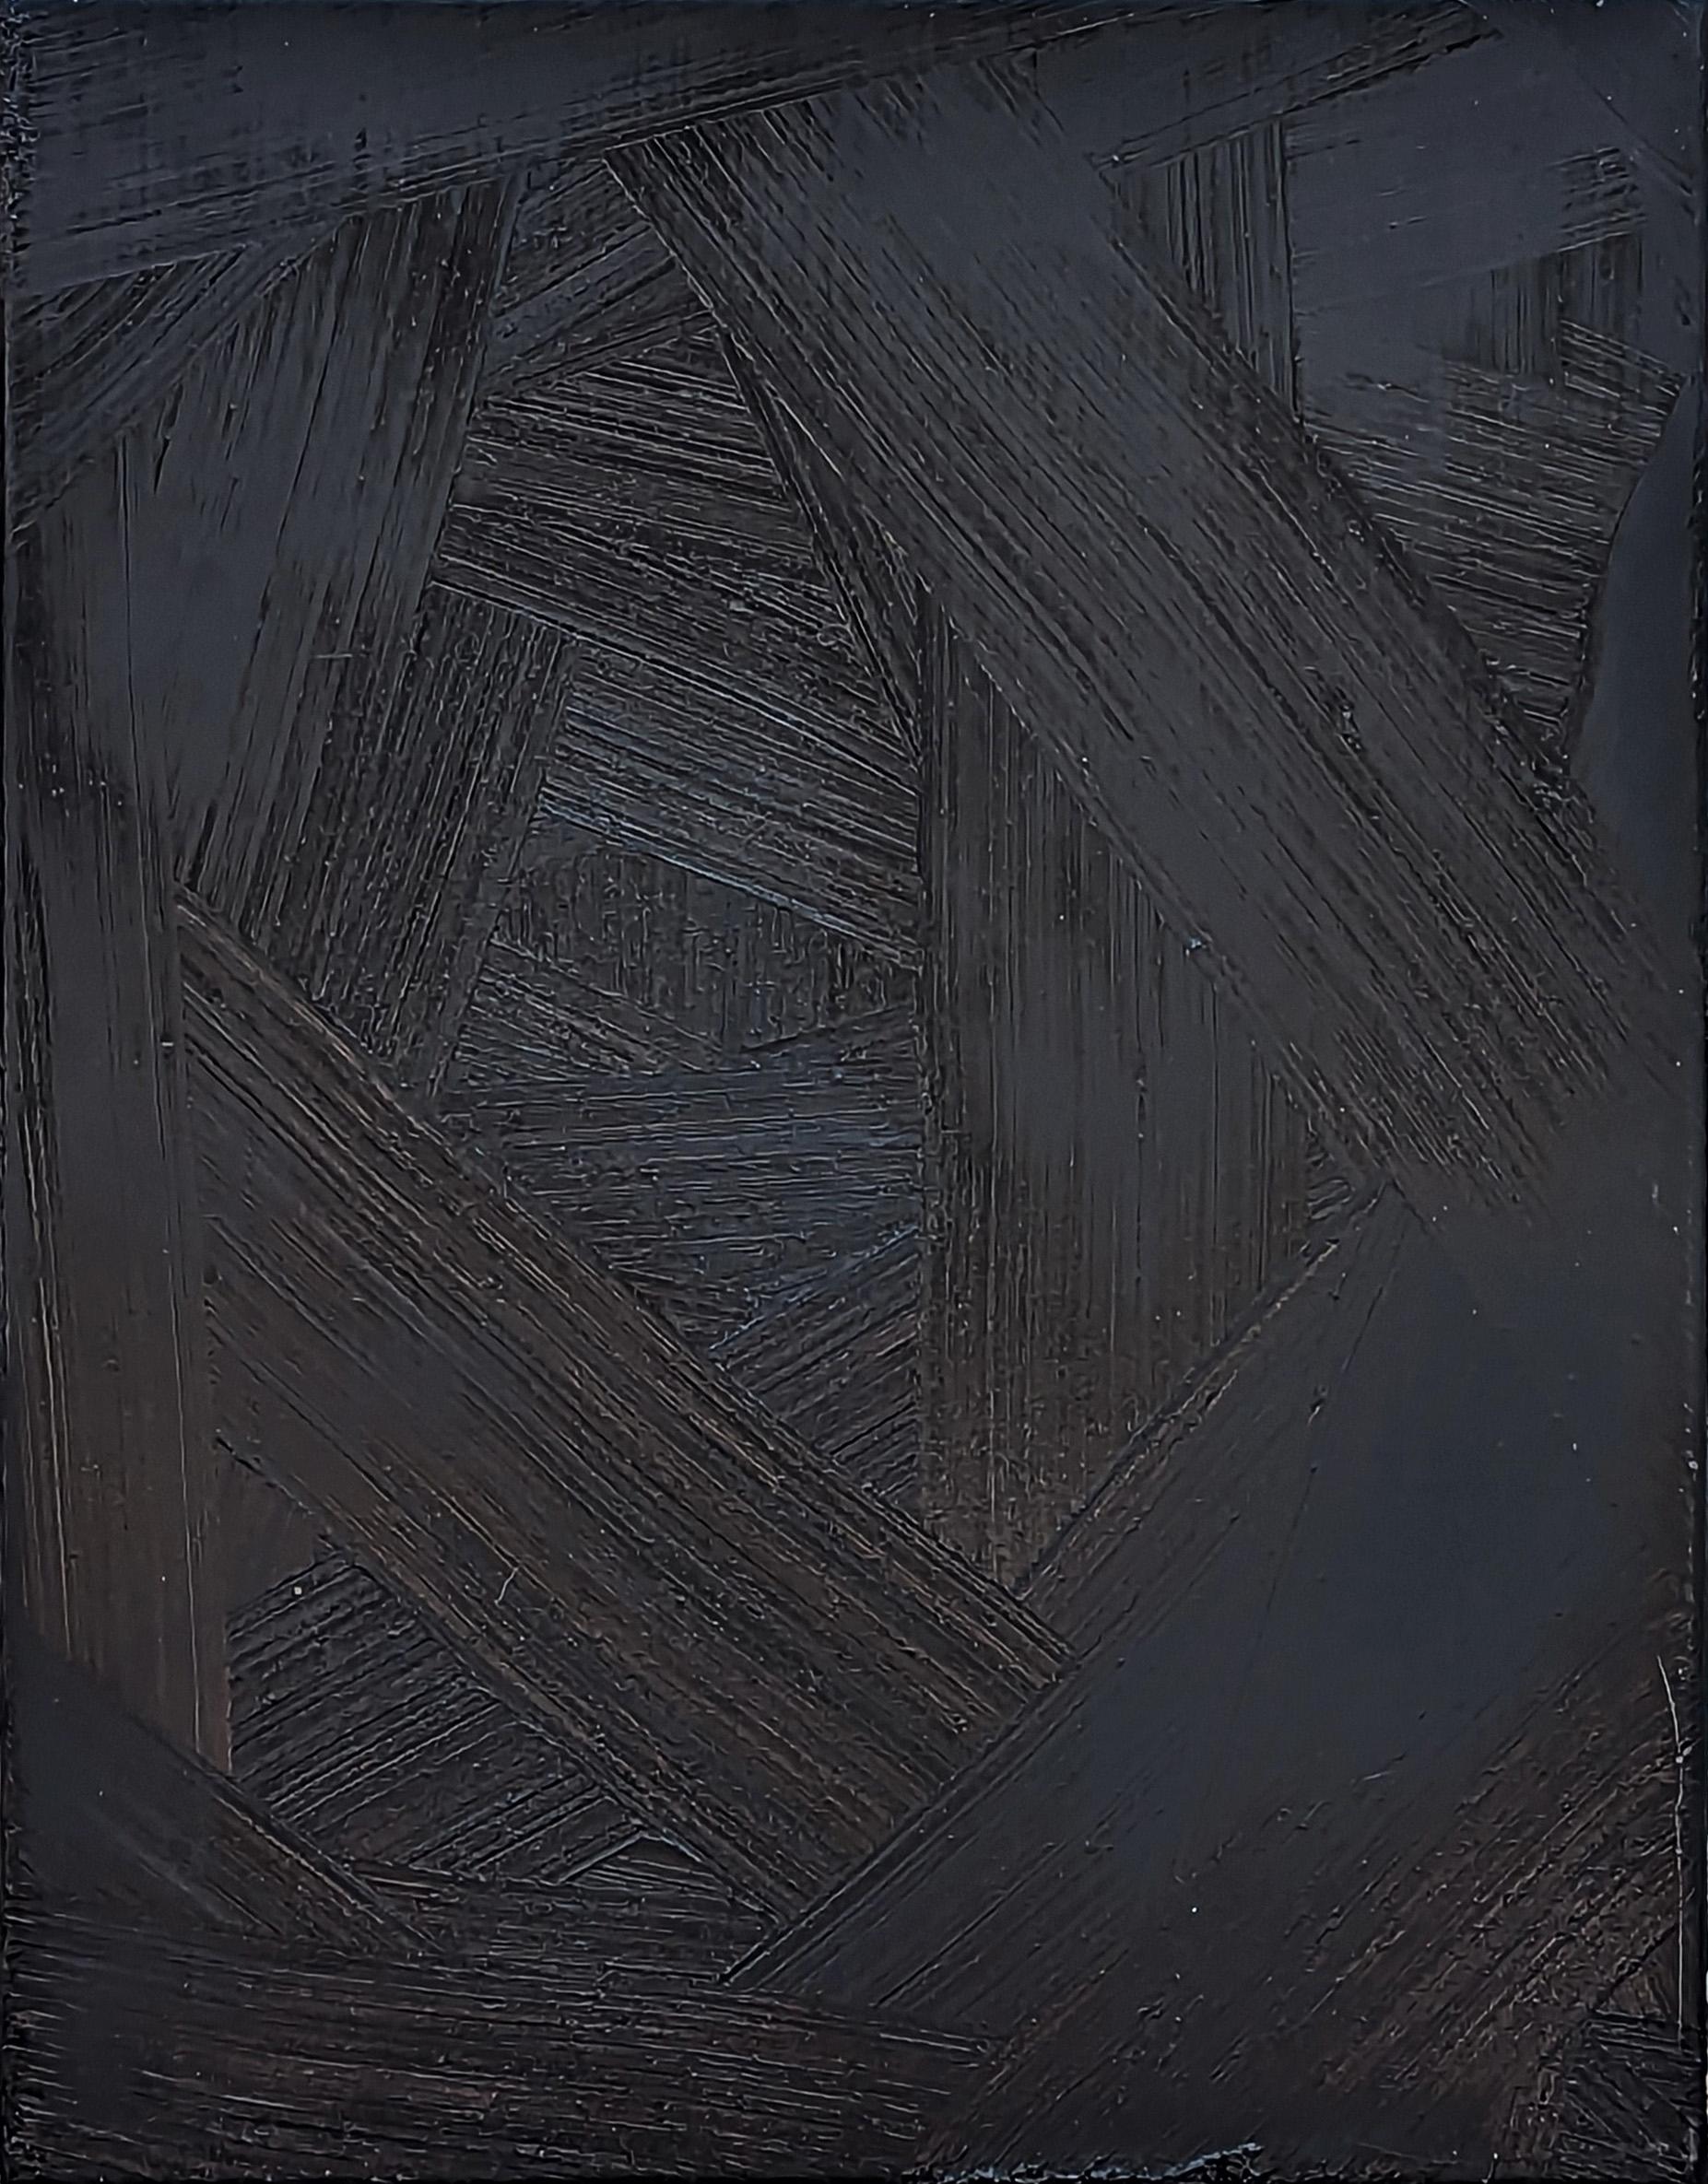 Black textured impasto painting by contemporary artist Paul Wiener. The work features a thick layer of intensely pigmented paint in which the viewer can easily see the artist's brushstrokes. The richness of the black color speaks to the the title of